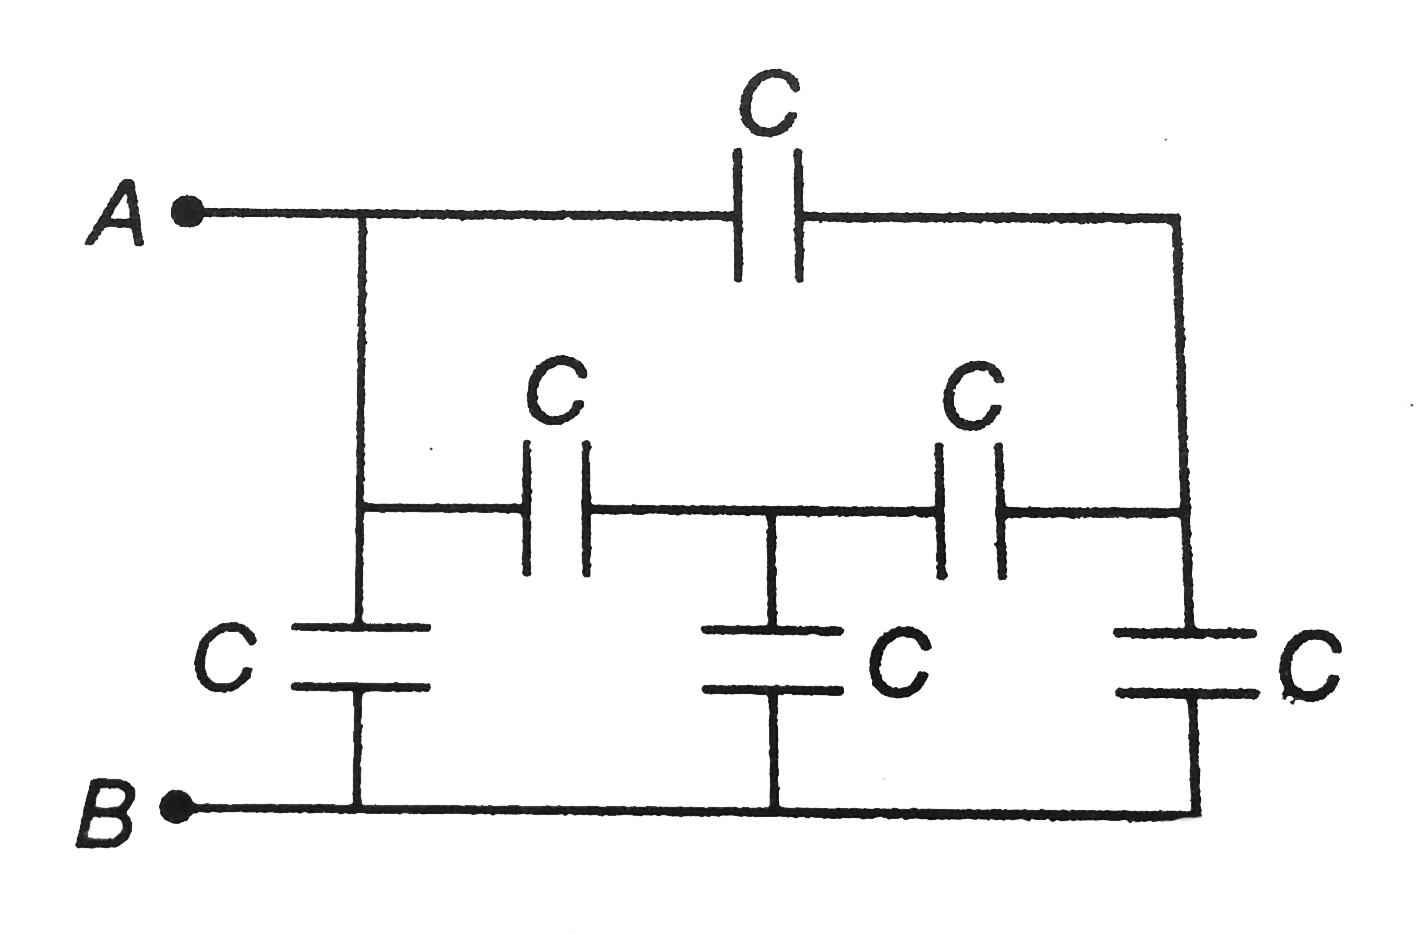 Six equal capacitors each of capacitance C are connected as shown in the figure. The equivalent capacitance between points A and B is